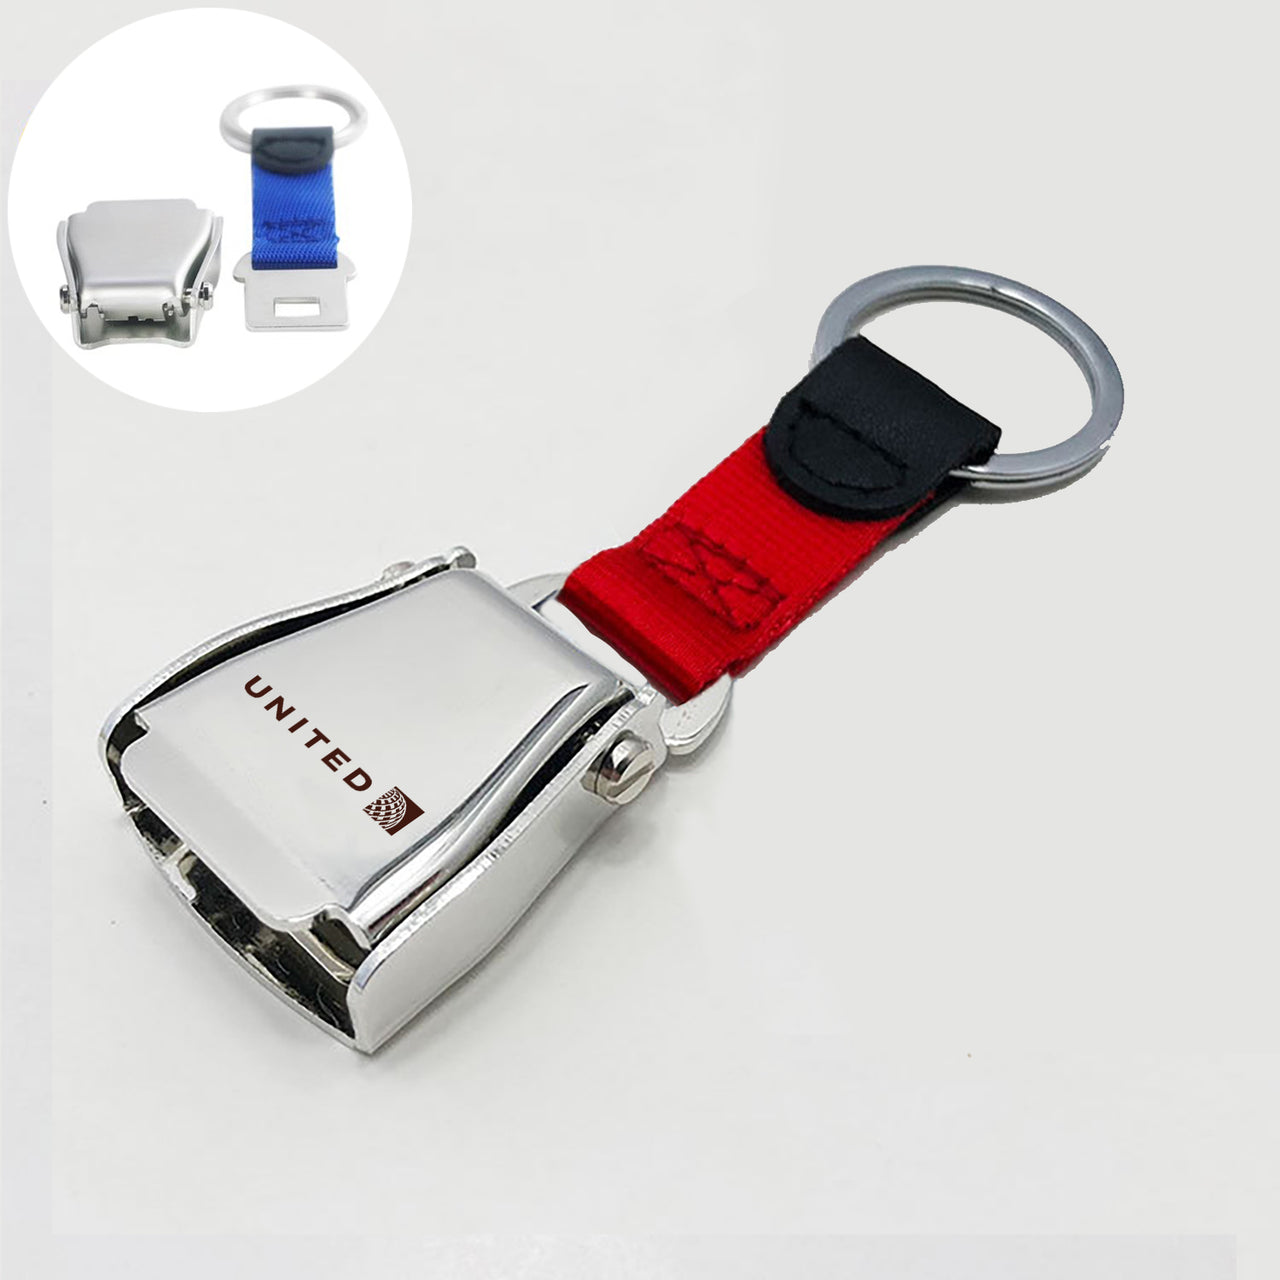 United Airlines Designed Airplane Seat Belt Key Chains